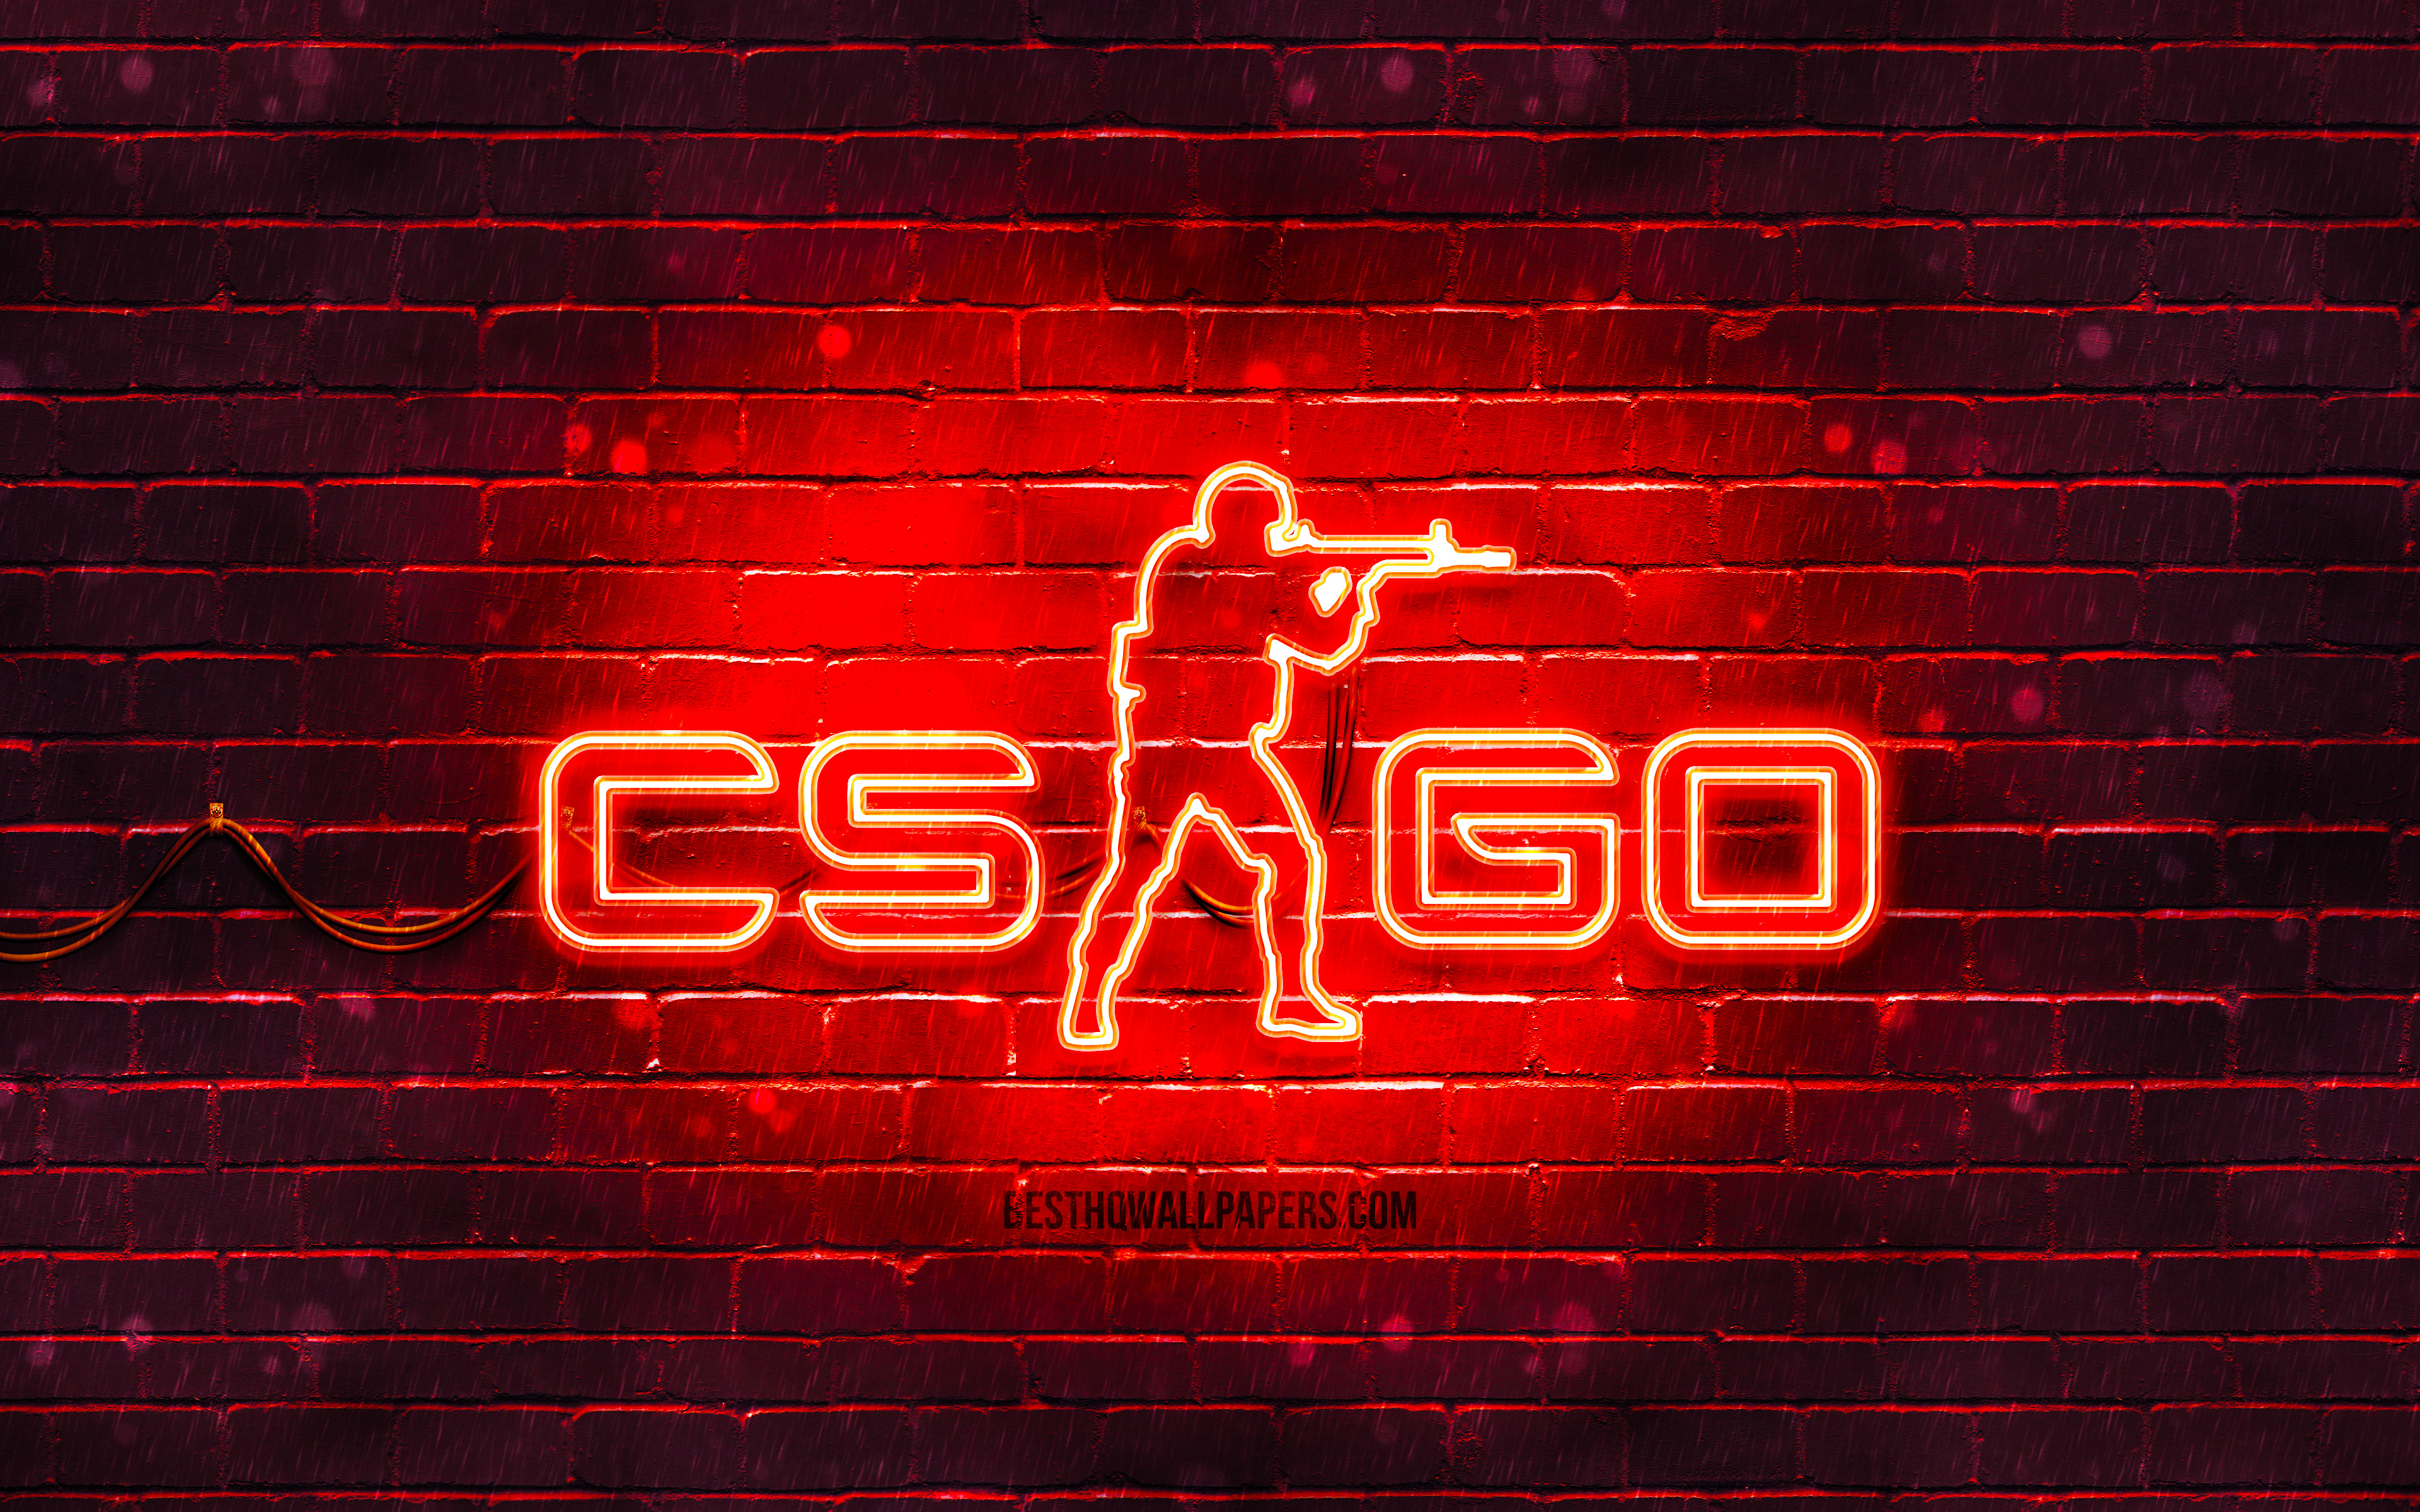 Download wallpapers CS Go red logo, 4k, red brickwall, Counter-Strike, CS Go  logo, 2020 games, CS Go neon logo, CS Go, Counter-Strike Global Offensive  for desktop with resolution 3840x2400. High Quality HD